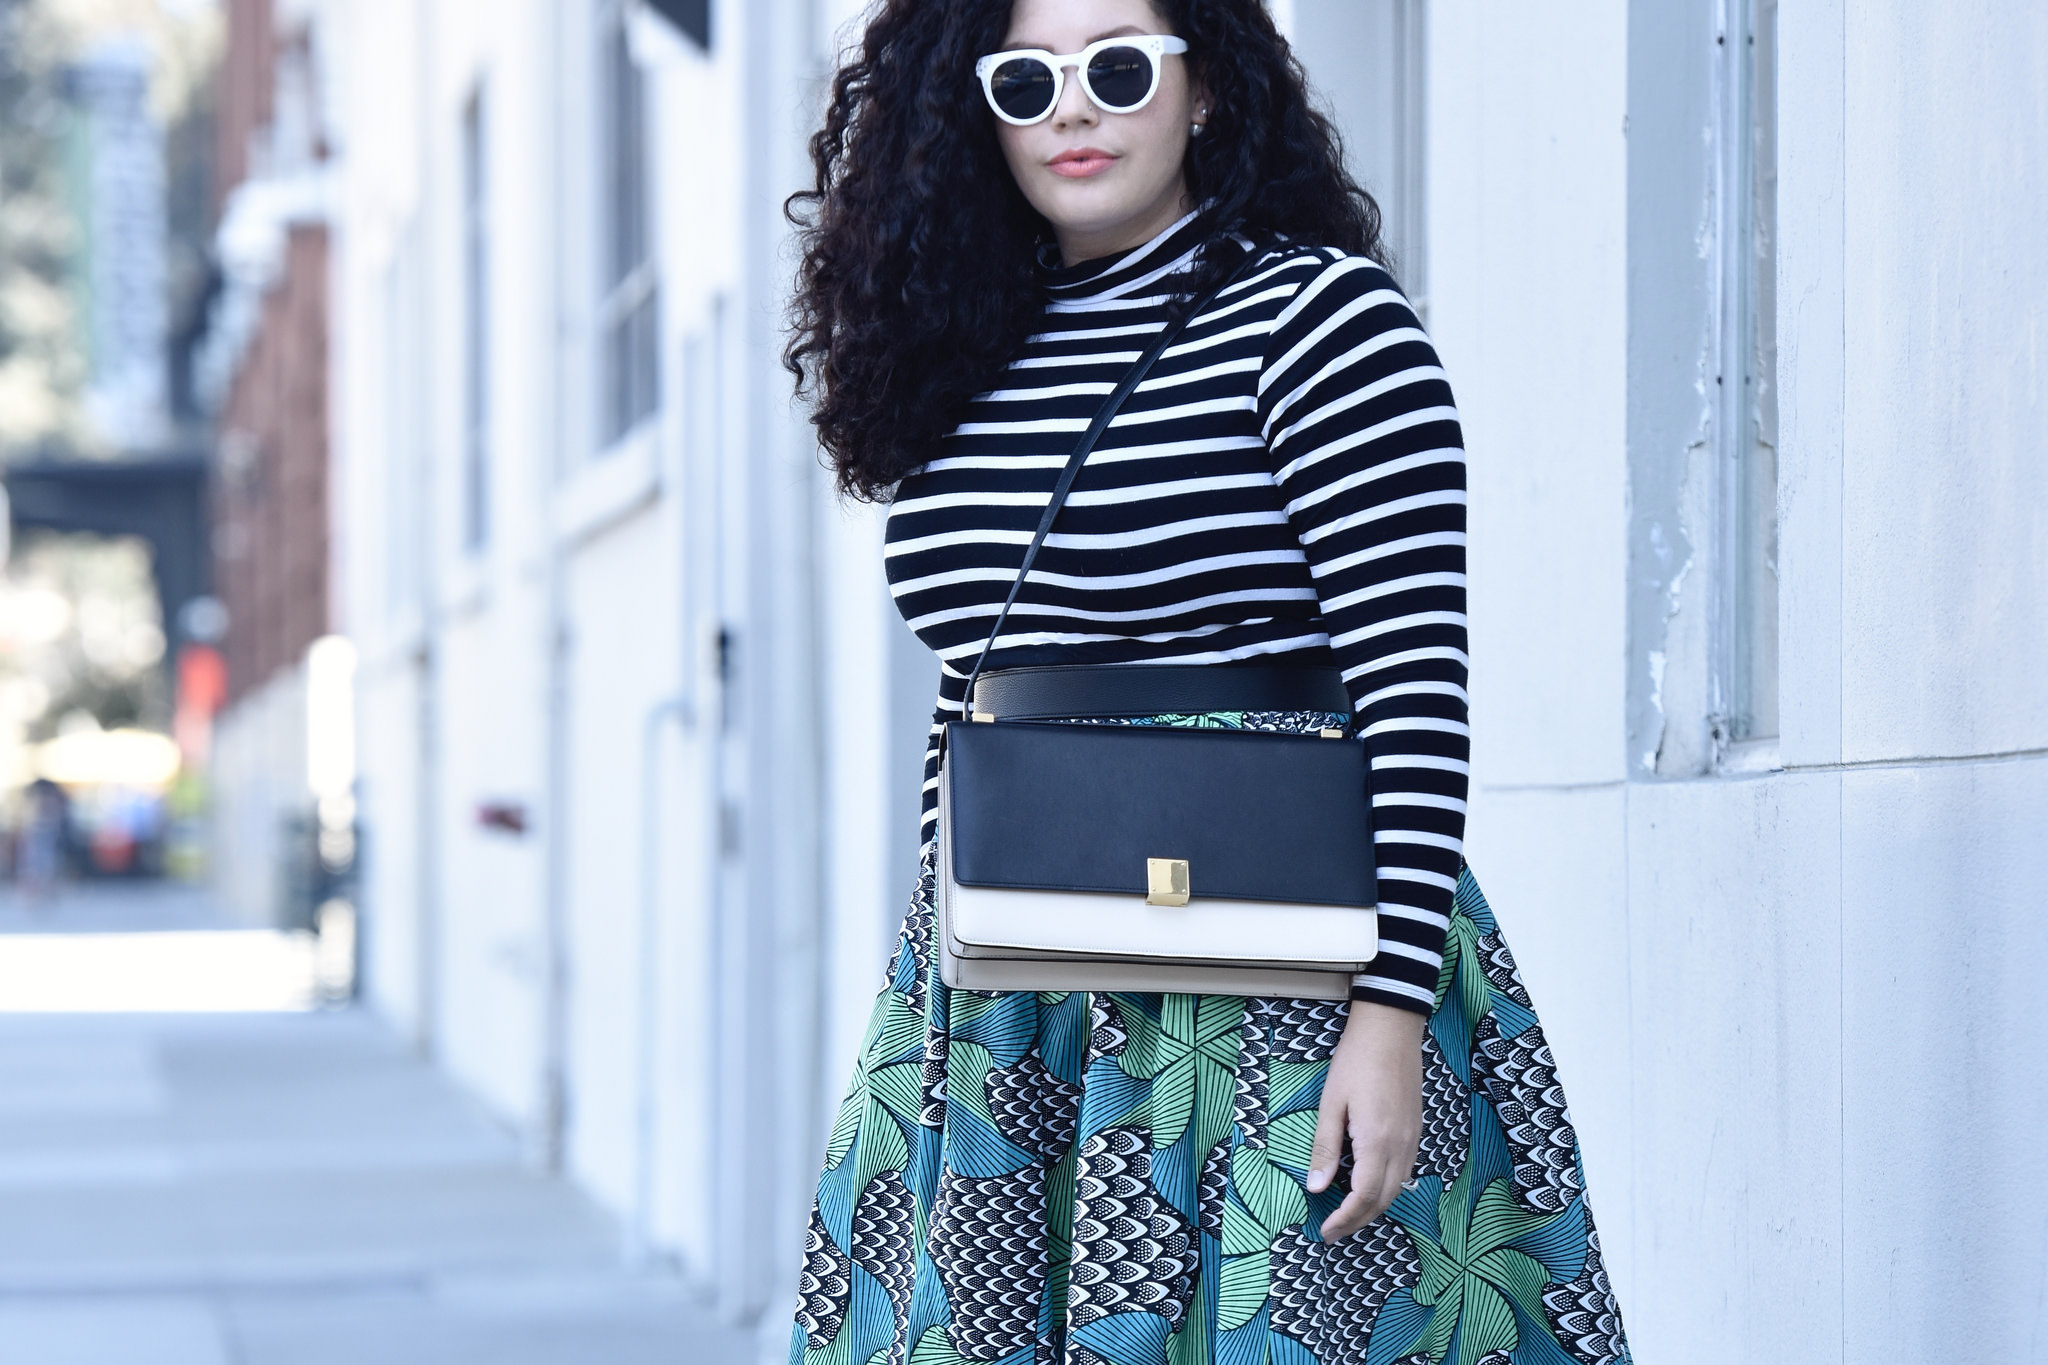 Here’s Why You Need A Printed Skirt Via @GirlWithCurves #ootd #plussize #blogger #plus #size